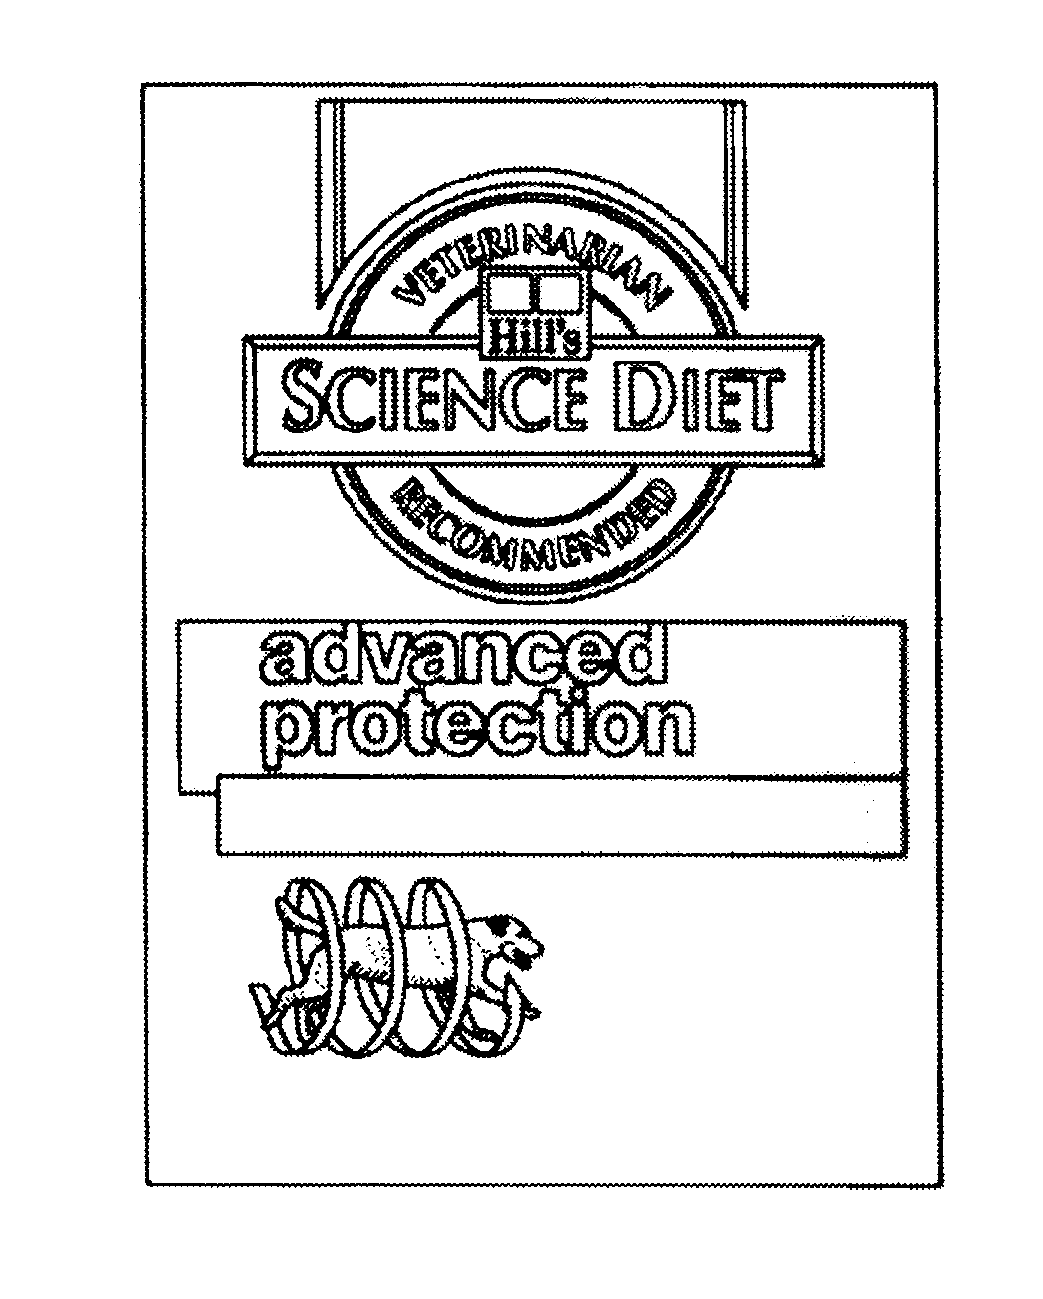 HILL'S SCIENCE DIET ADVANCED PROTECTION VETERINARIAN RECOMMENDED